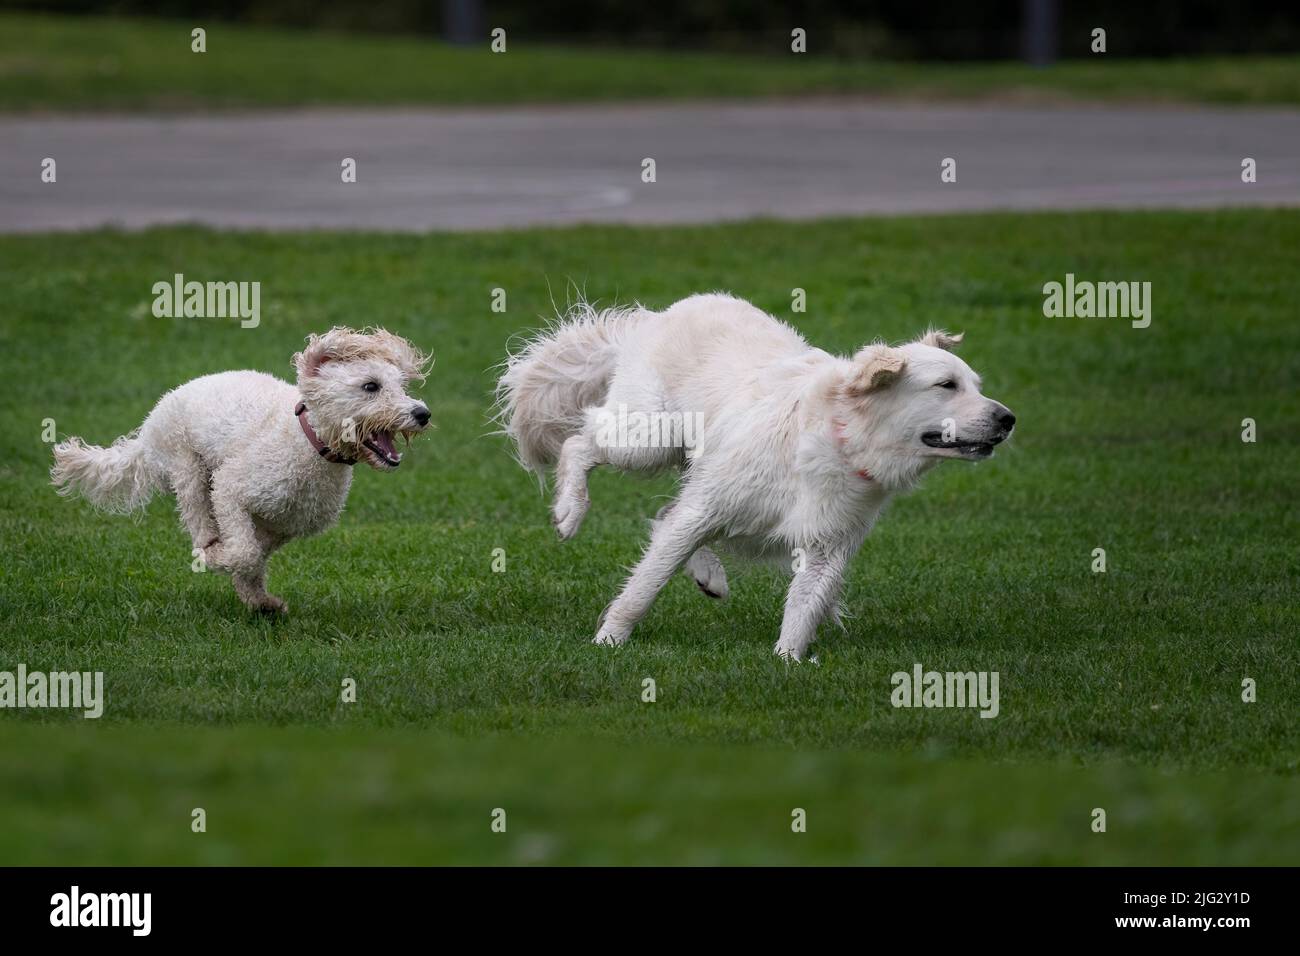 Two white dogs chasing each other on green grass in a park, Auckland Stock Photo